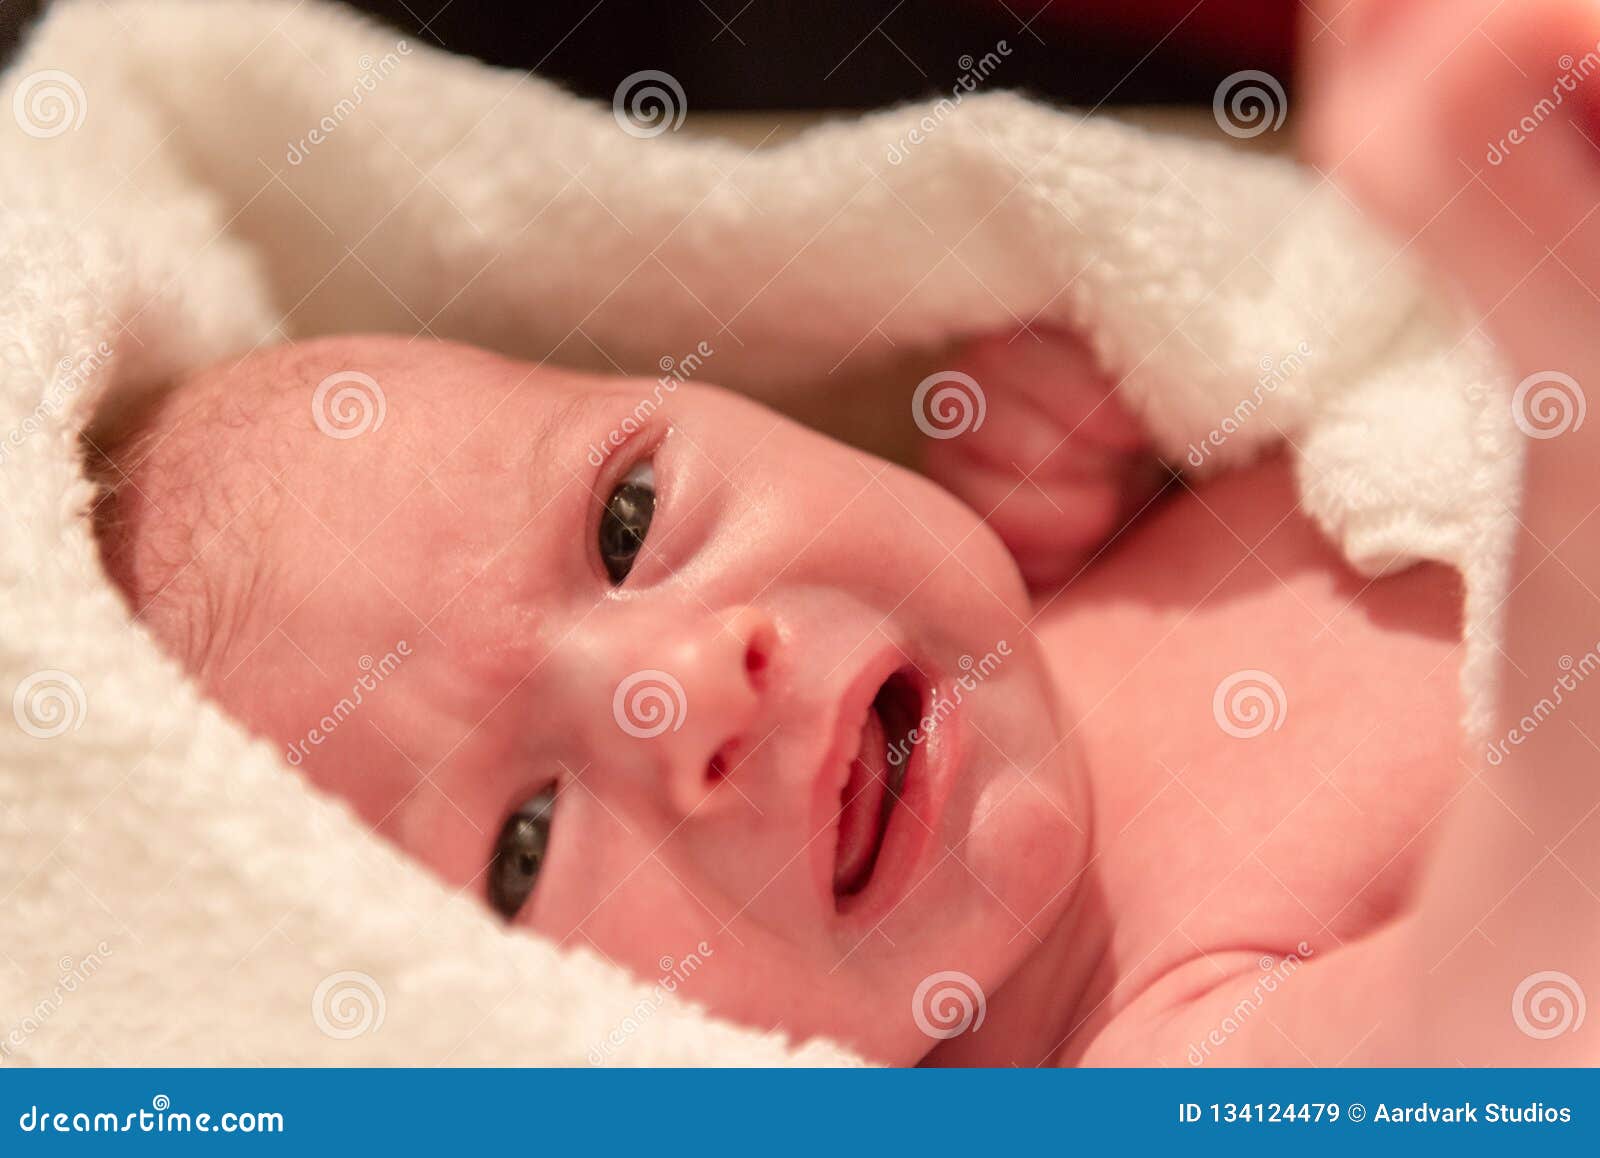 Newborn Baby Wrapped in White Blanket Stock Image - Image of body